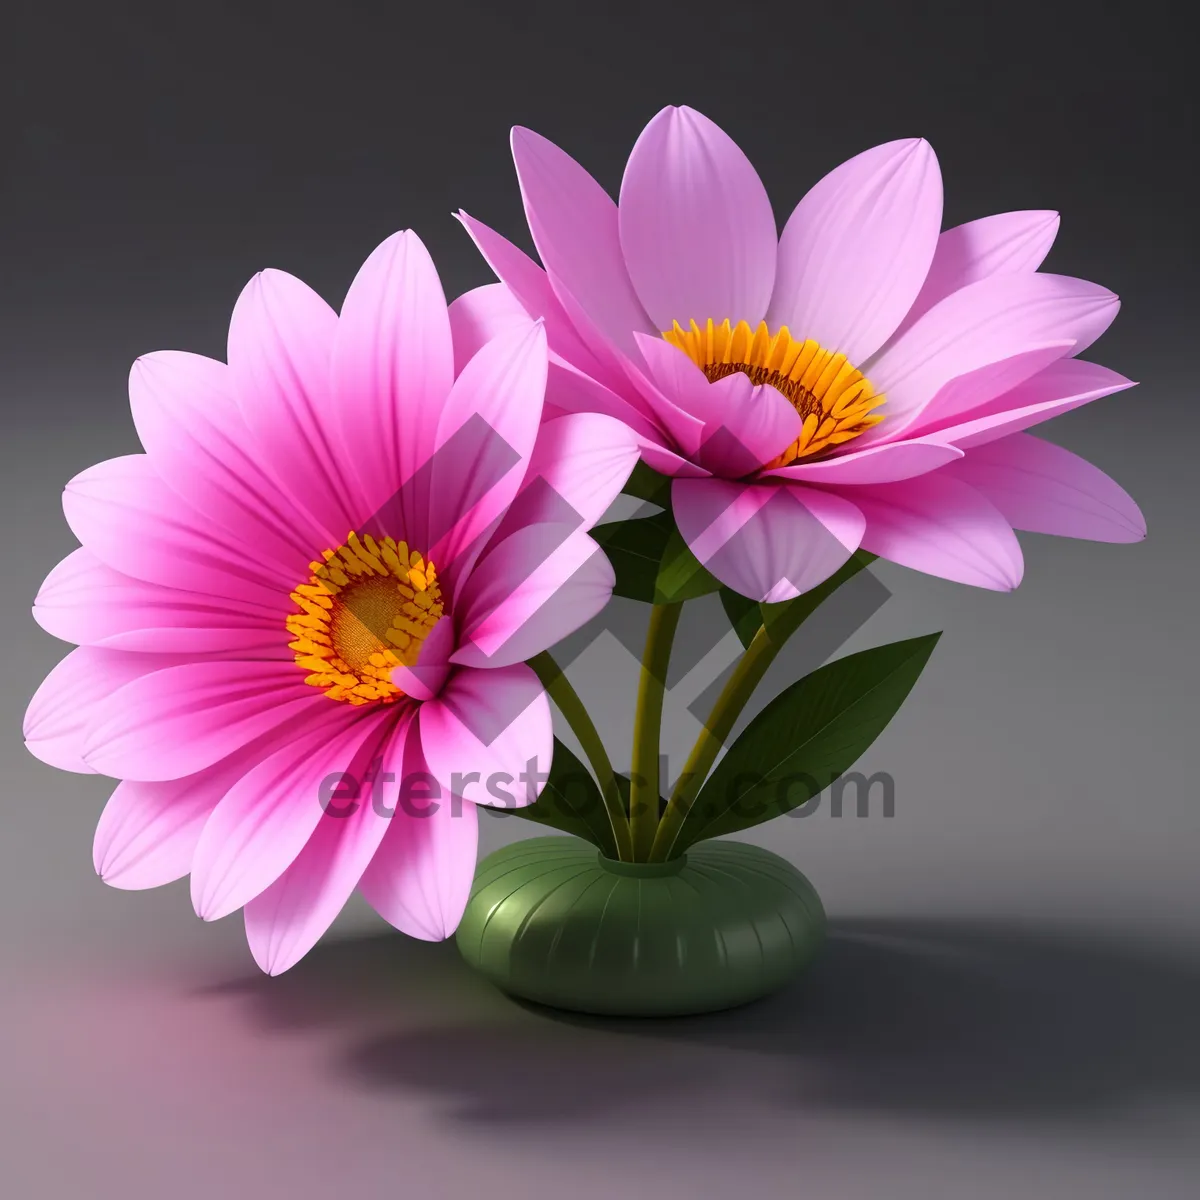 Picture of Pink Daisy Blooming in Summer Garden